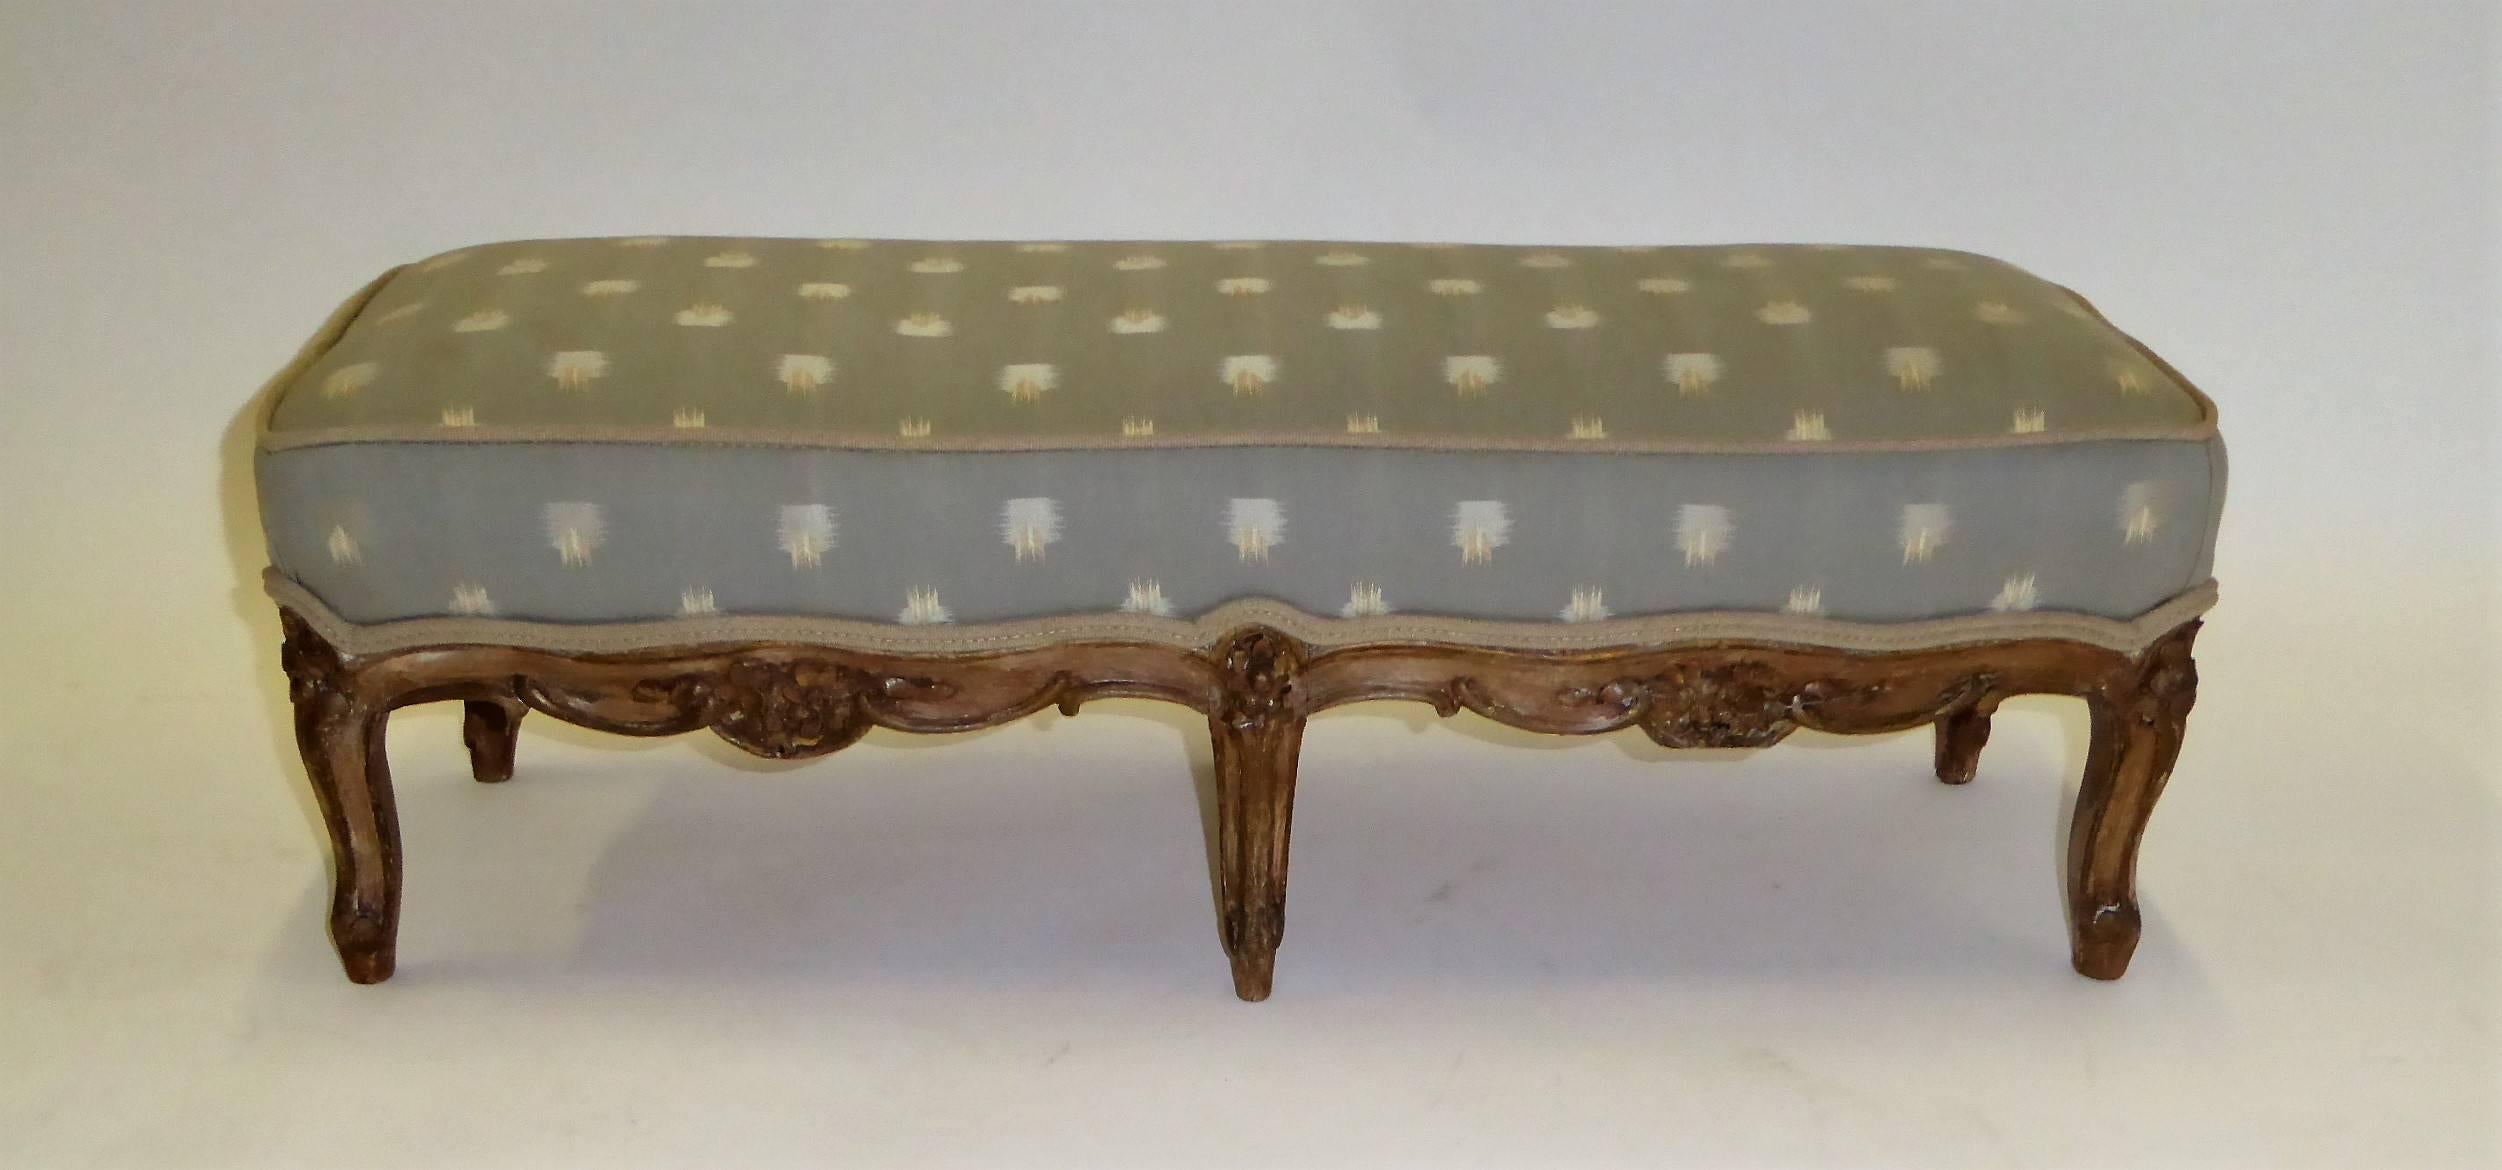 18th Century Louis XV Petite Footstool Tabouret Original Aged Finish, France For Sale 1